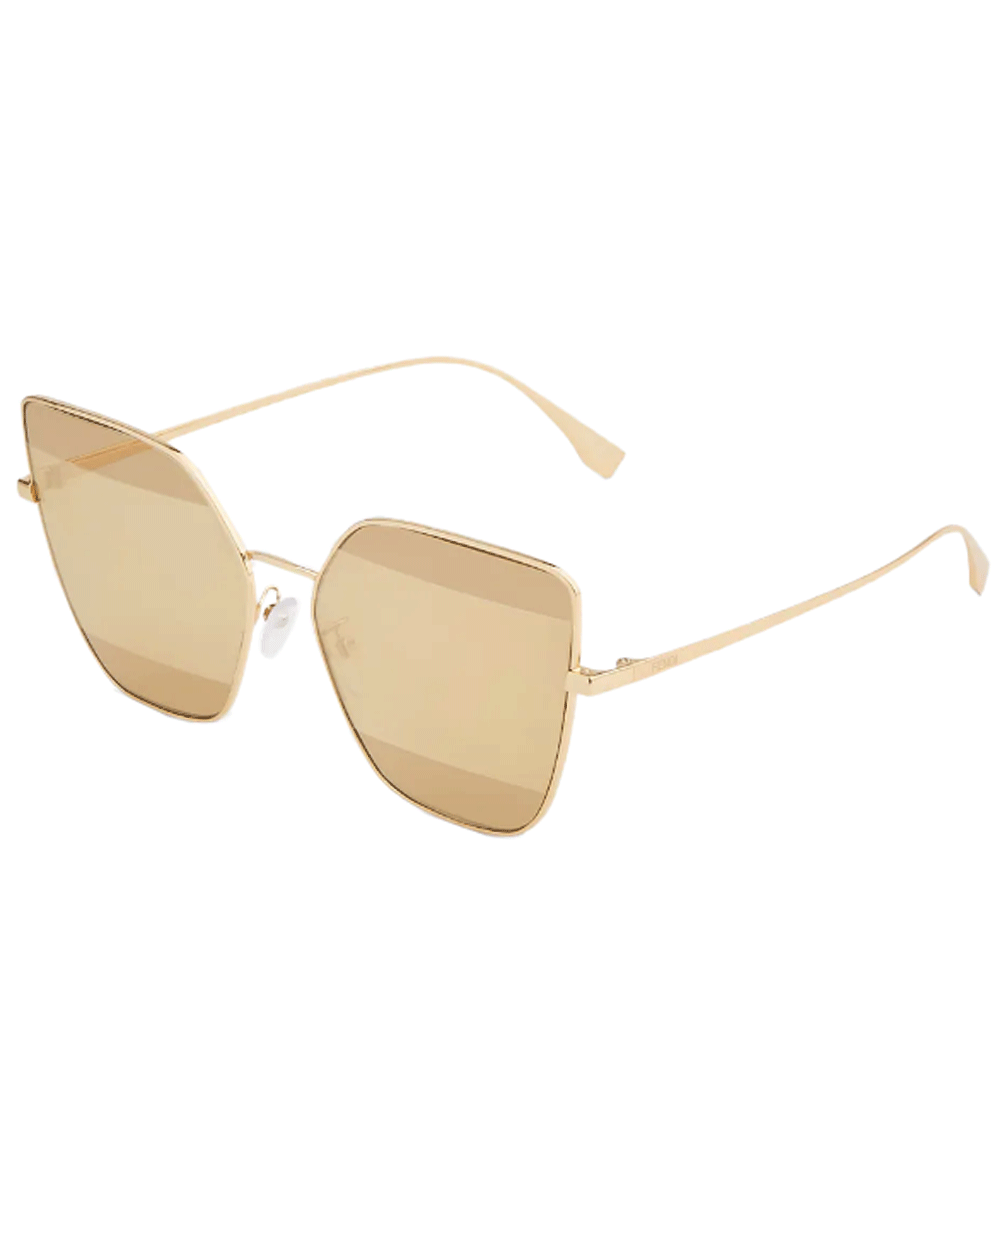 Stripes Sunglasses with Gold-Mirrored Lenses